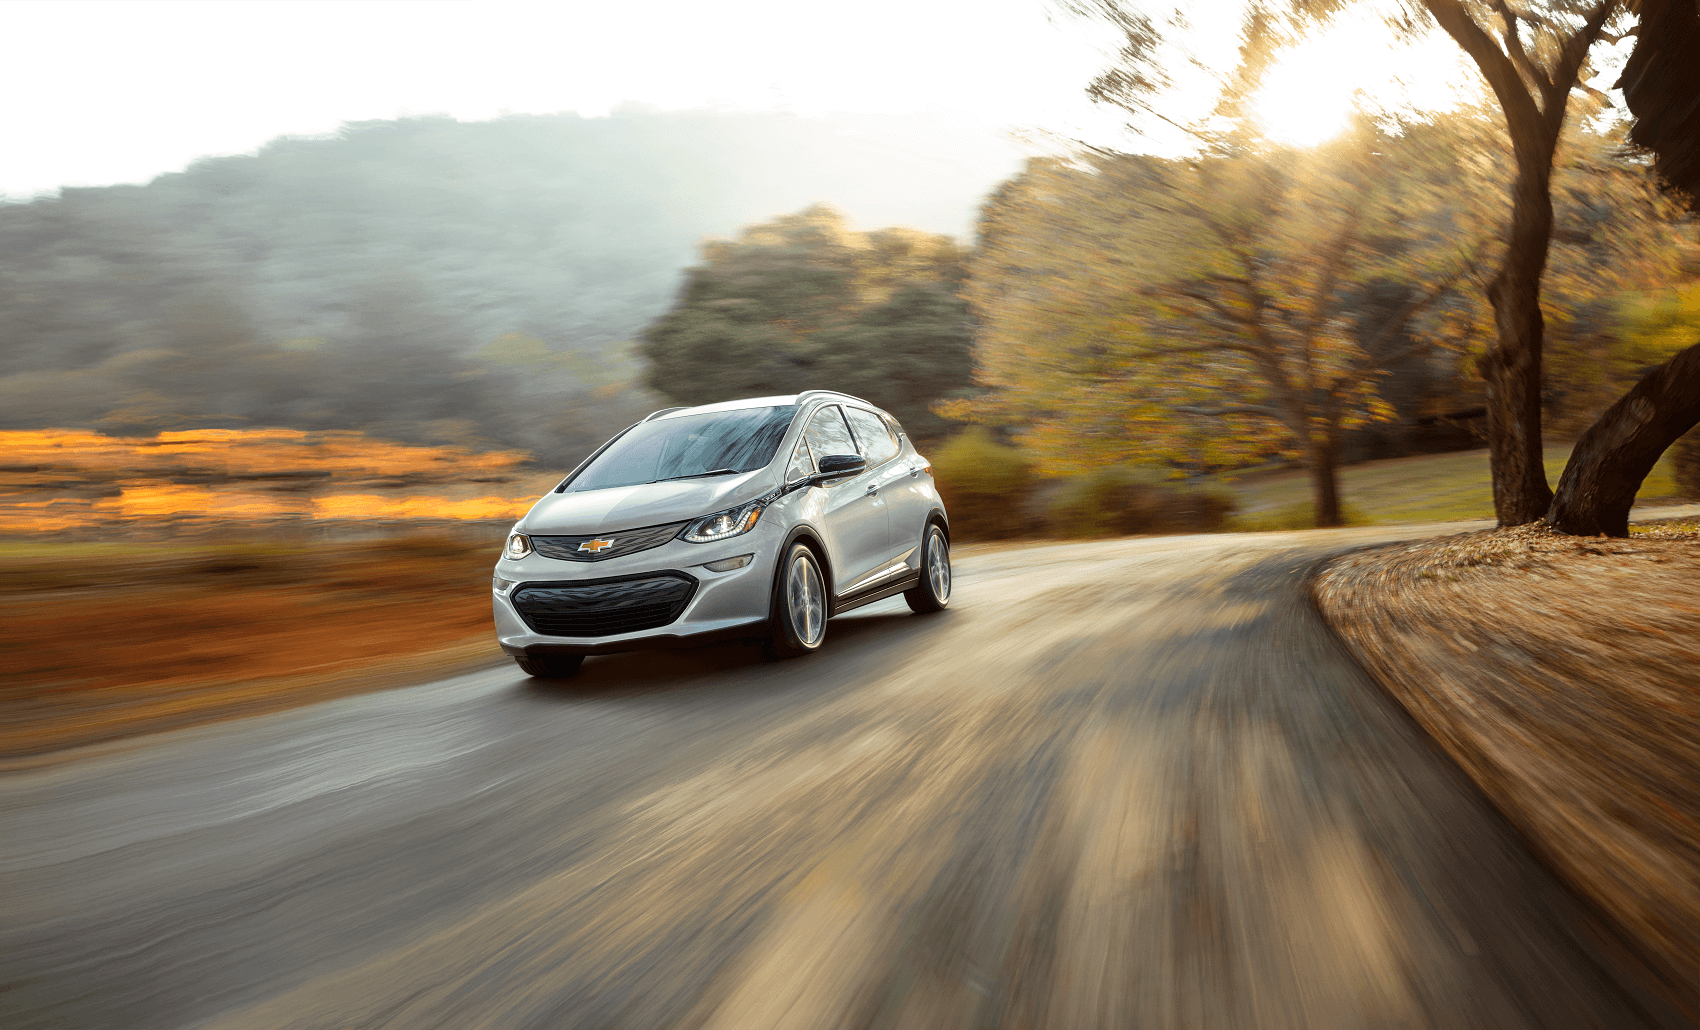 Chevy Bolt Lease Deals Sterling Heights MI
